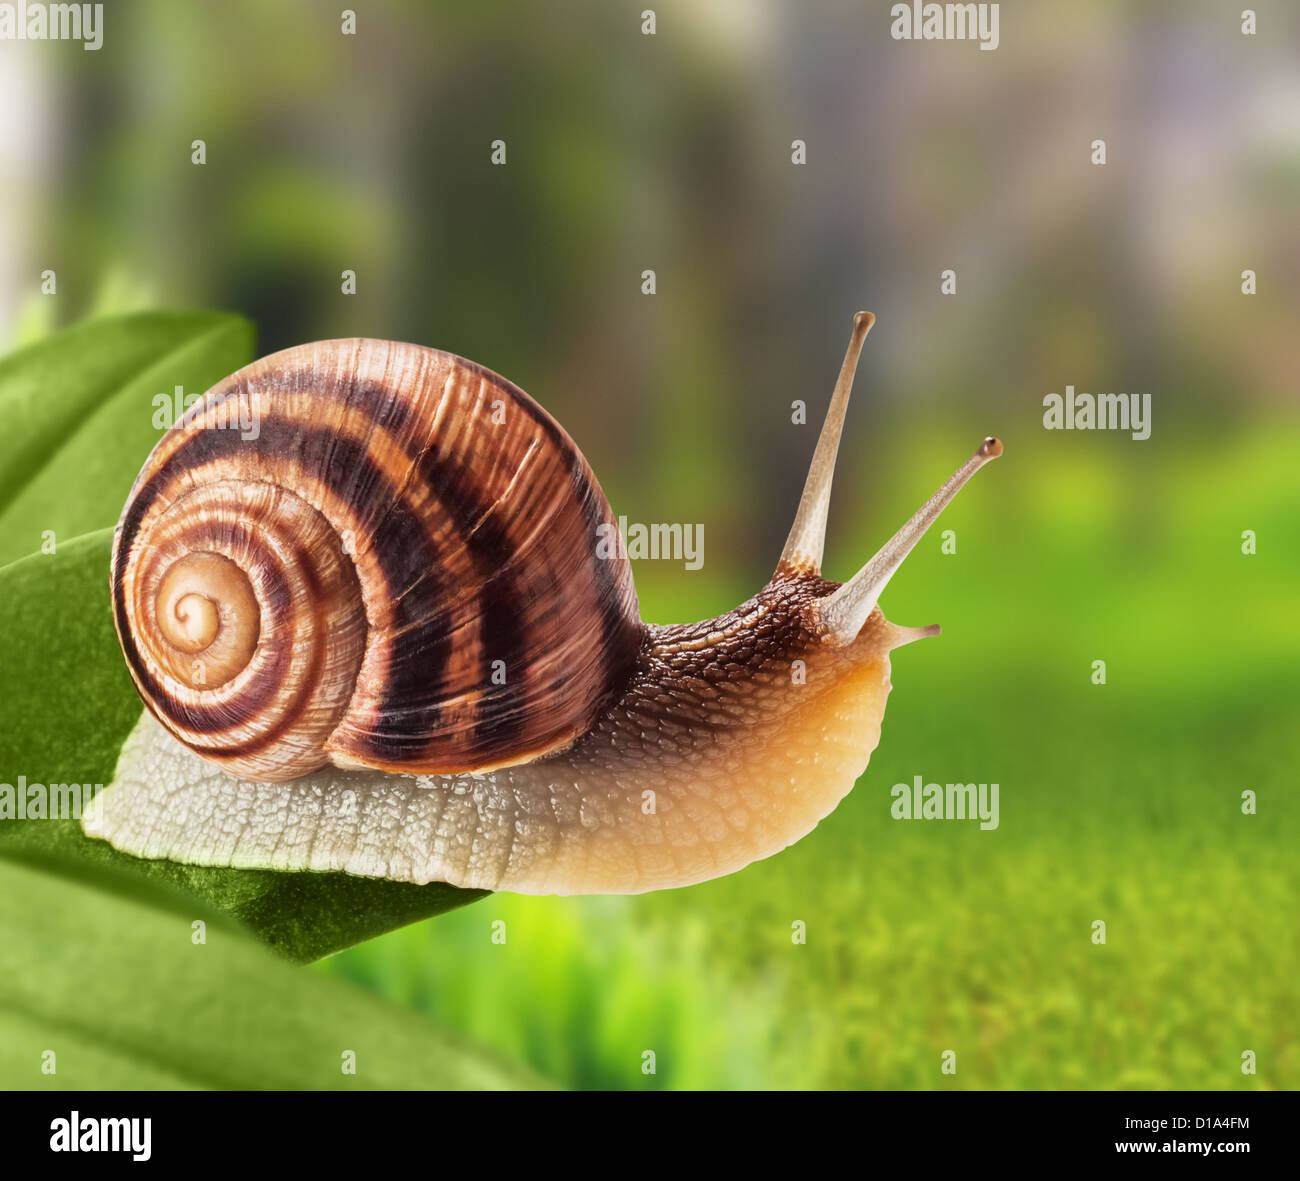 Garden snail climbing on a leaf in the park Stock Photo